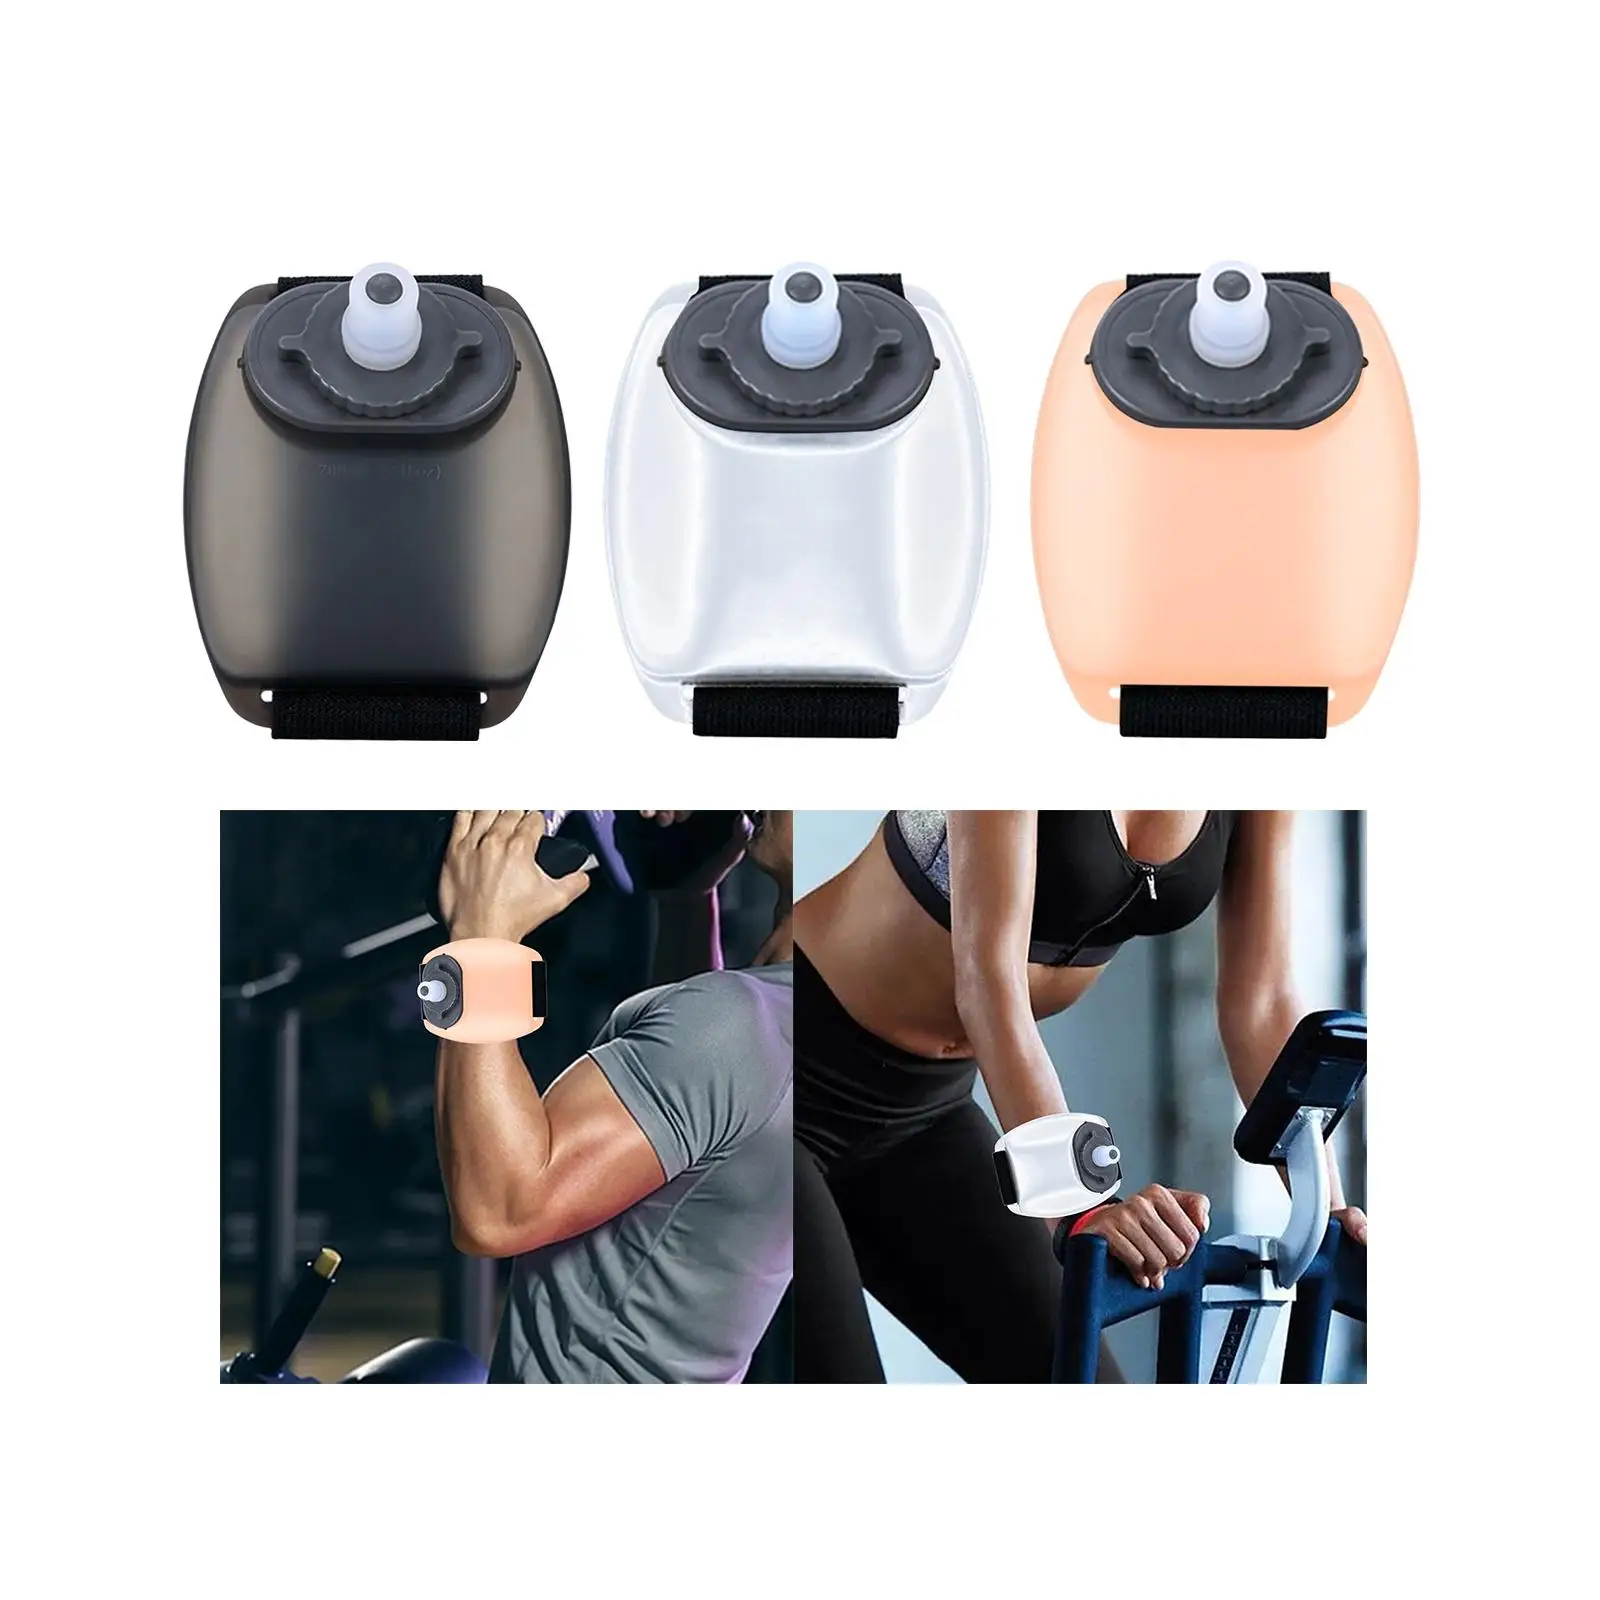 Wrist Water Bottle Wearable Sports Cup Silicone Adjustable Wrist Lightweight Handheld for Running Hiking Riding Cycling Camping